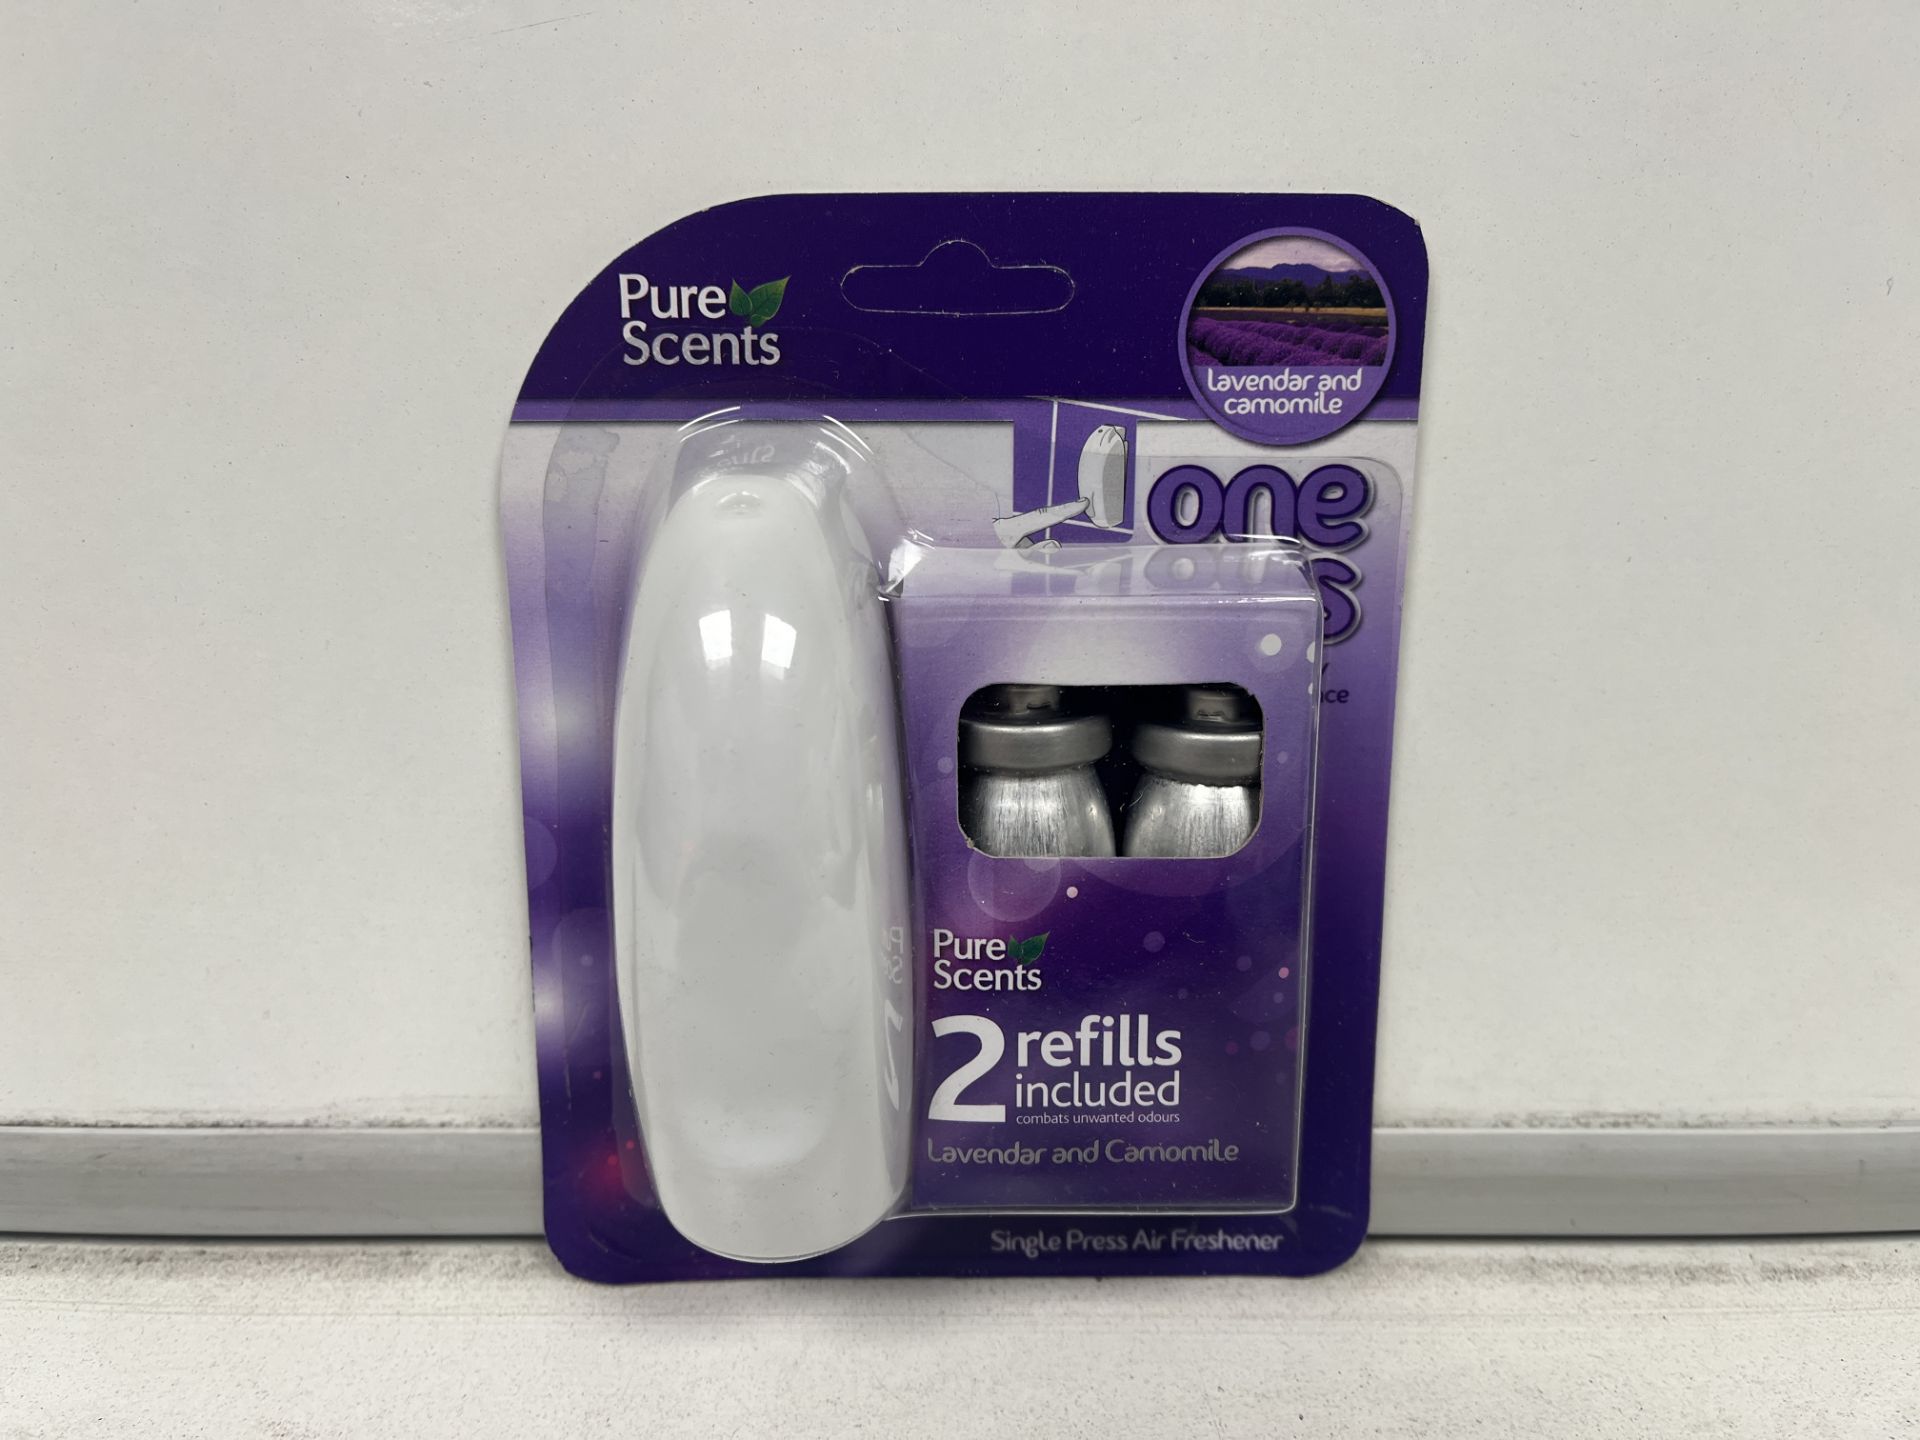 96 X NEW SETS OF PURESCENTS SINGLE PRESS AIR FRESHNERS. EACH INCLUDES 2 REFILLS. ASSORTED SCENTS.